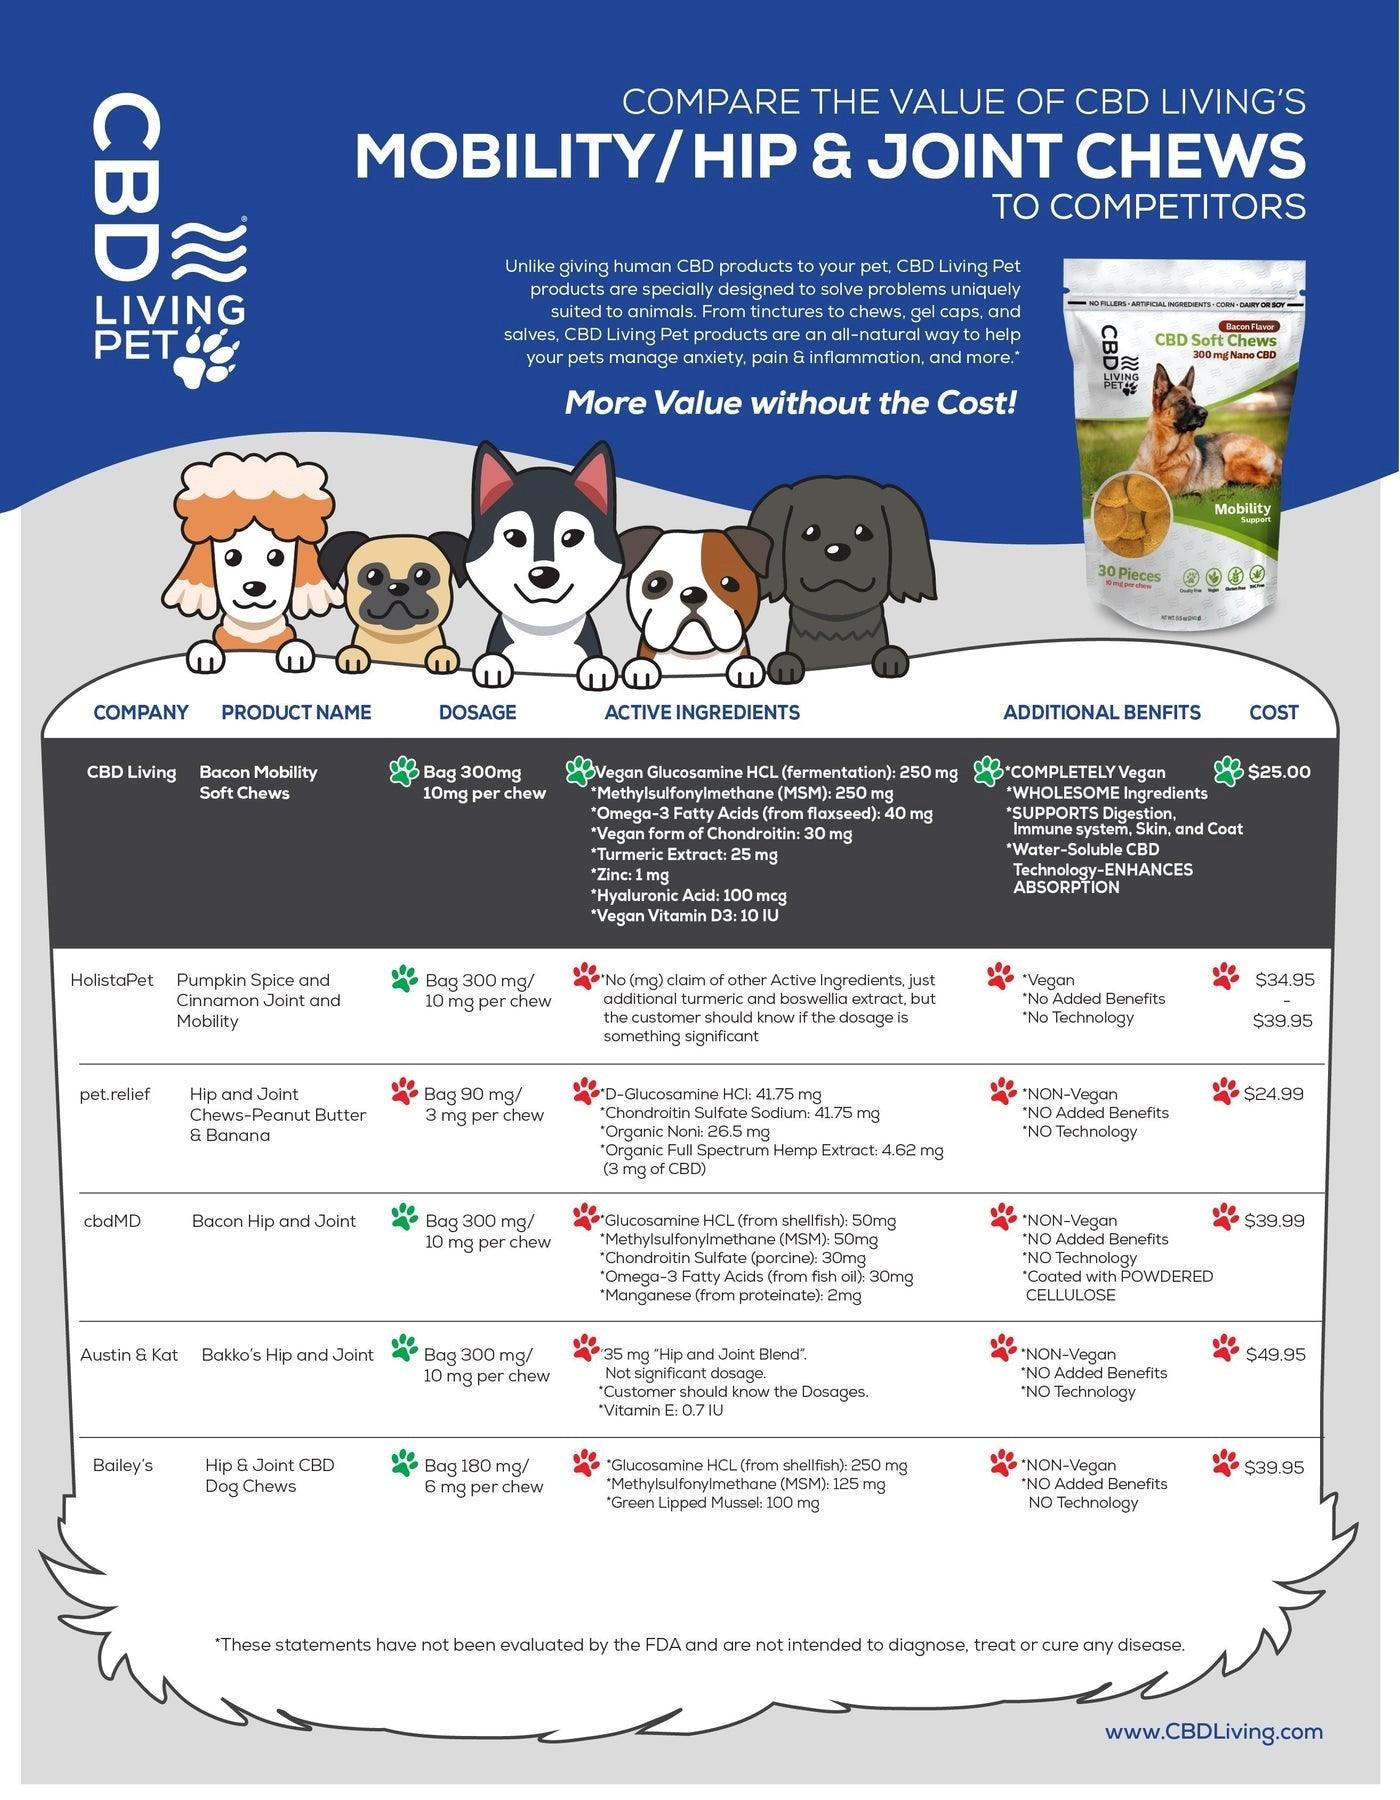 CBD living Pet Soft Chews for Mobility Support in Dogs comparison to competitors